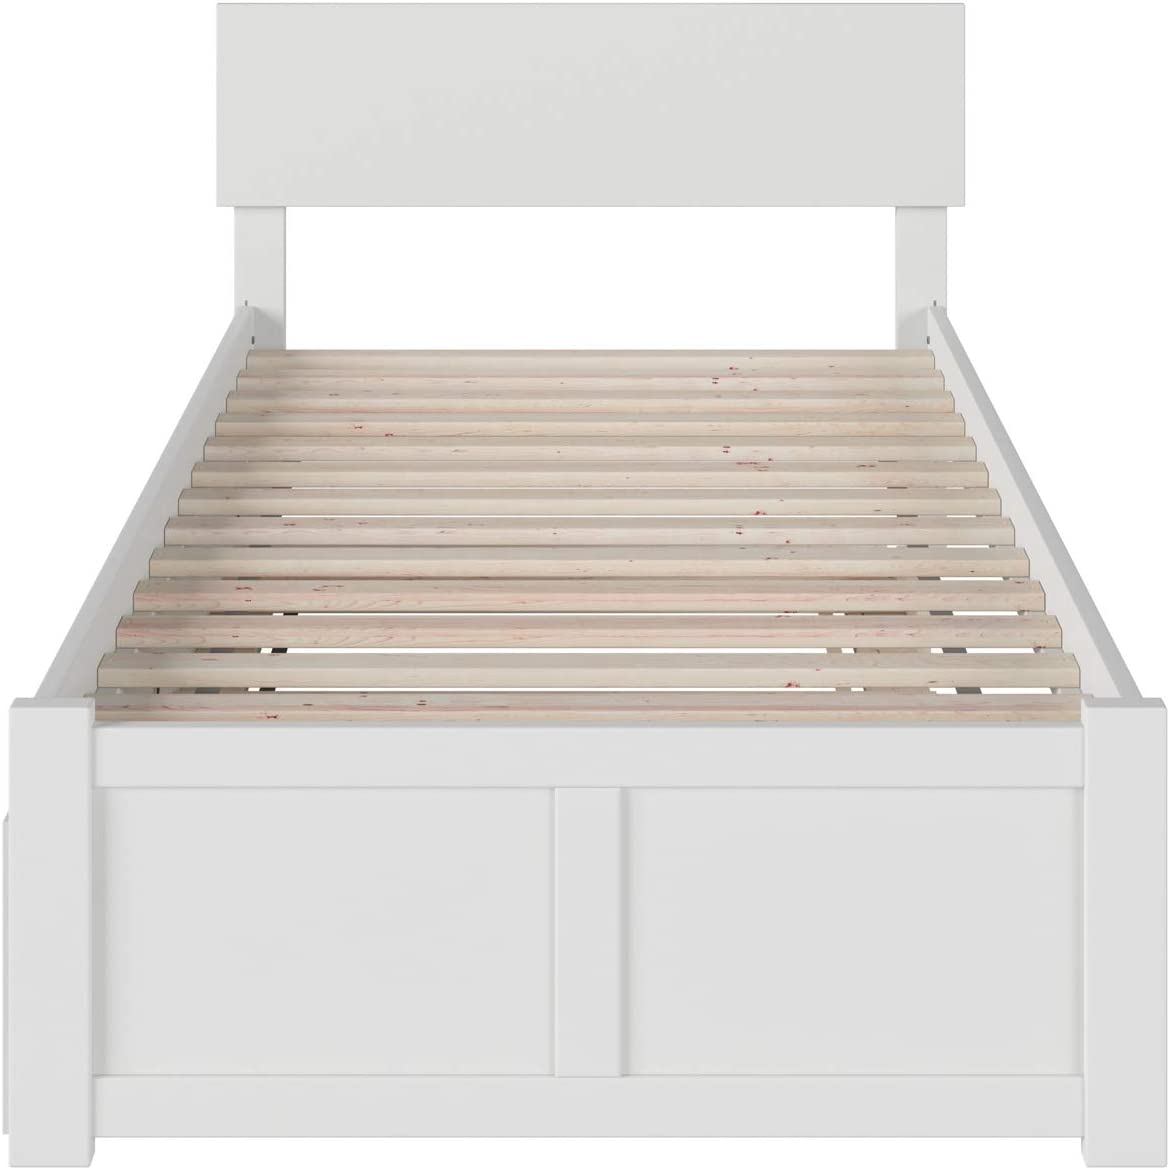 Atlantic Furniture Orlando Platform Trundle Bed with Turbo Charger, Twin - $215